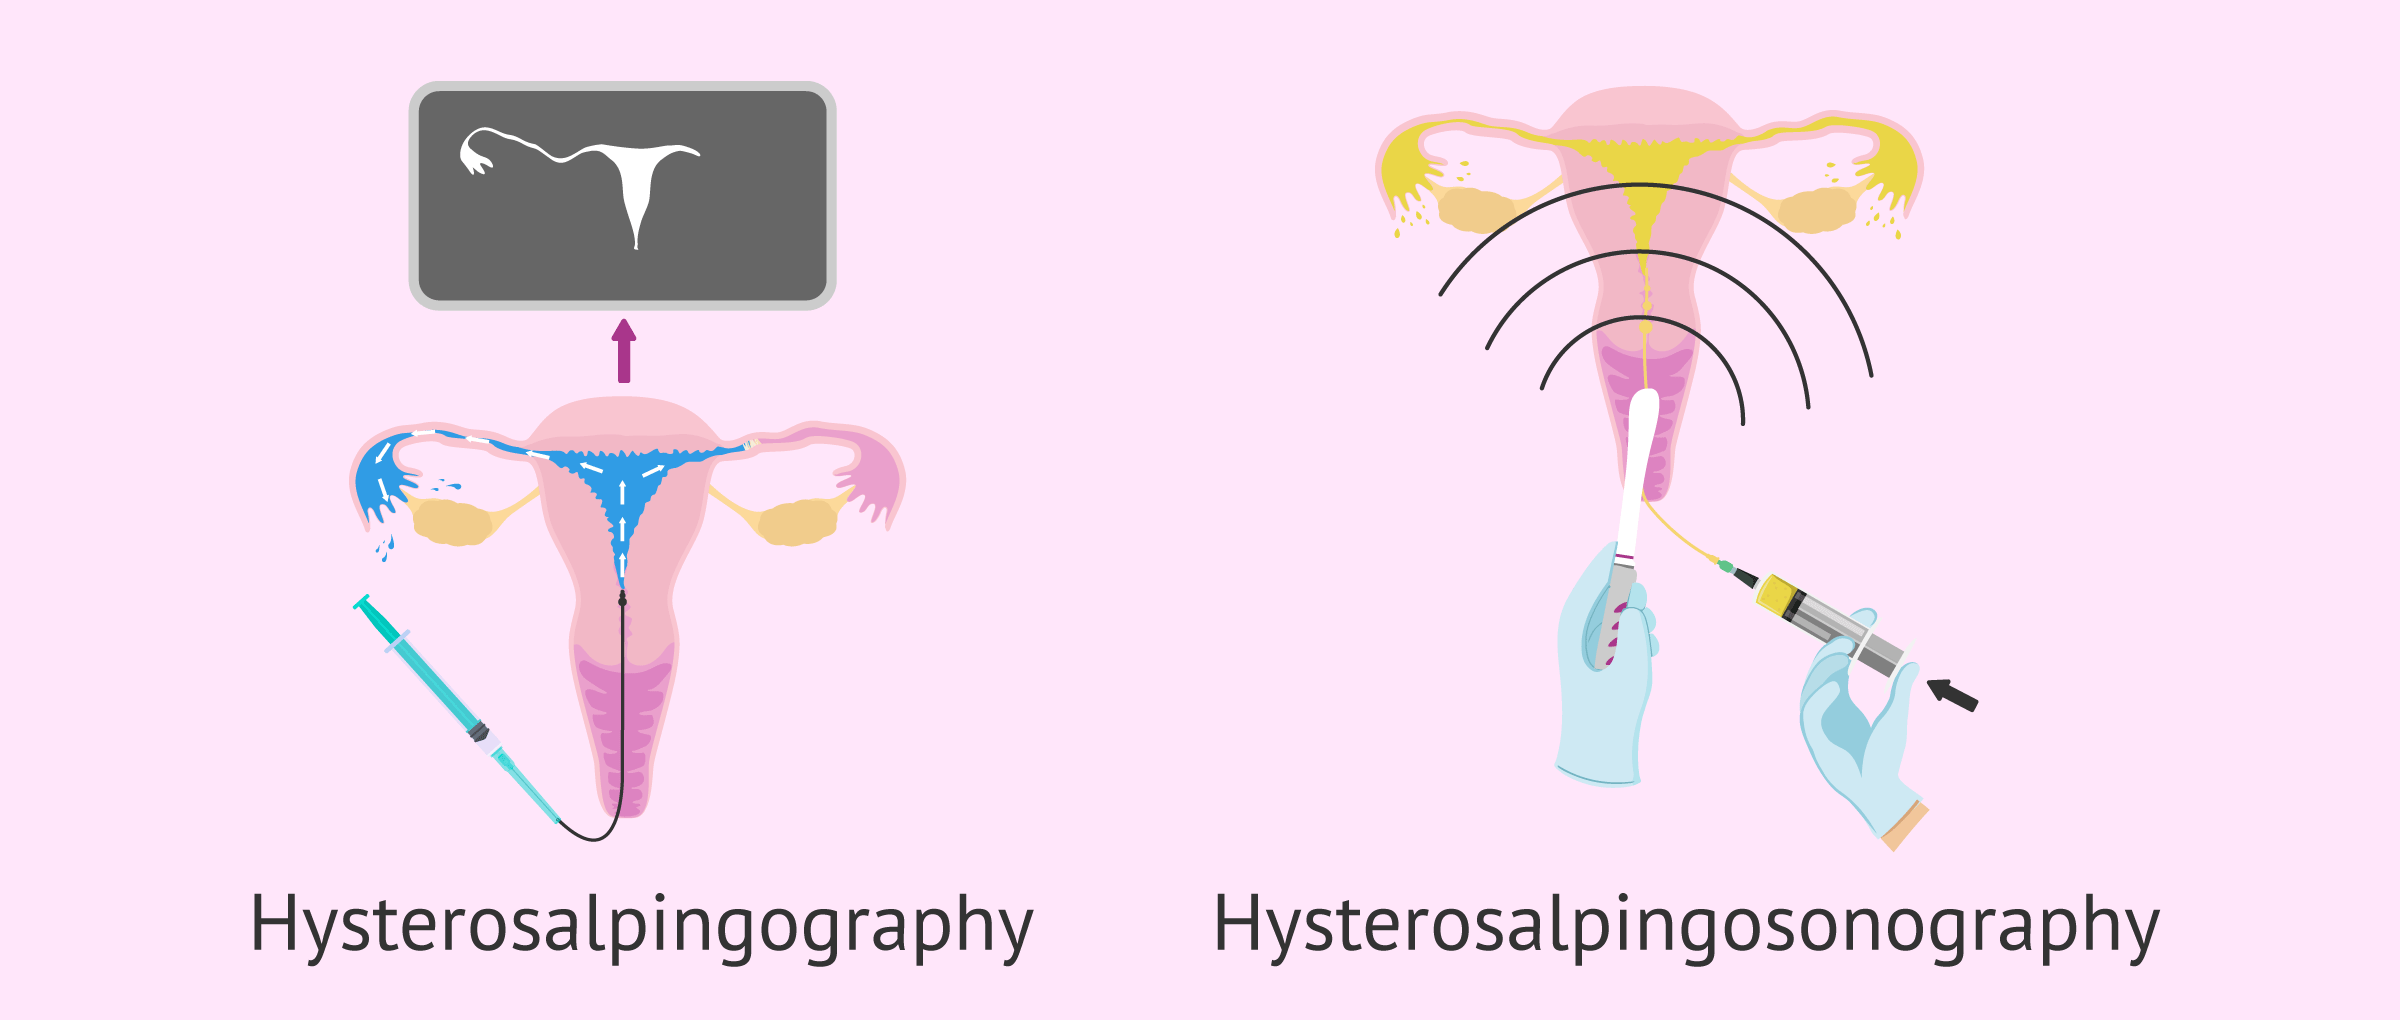 Types of hysterosalpingography